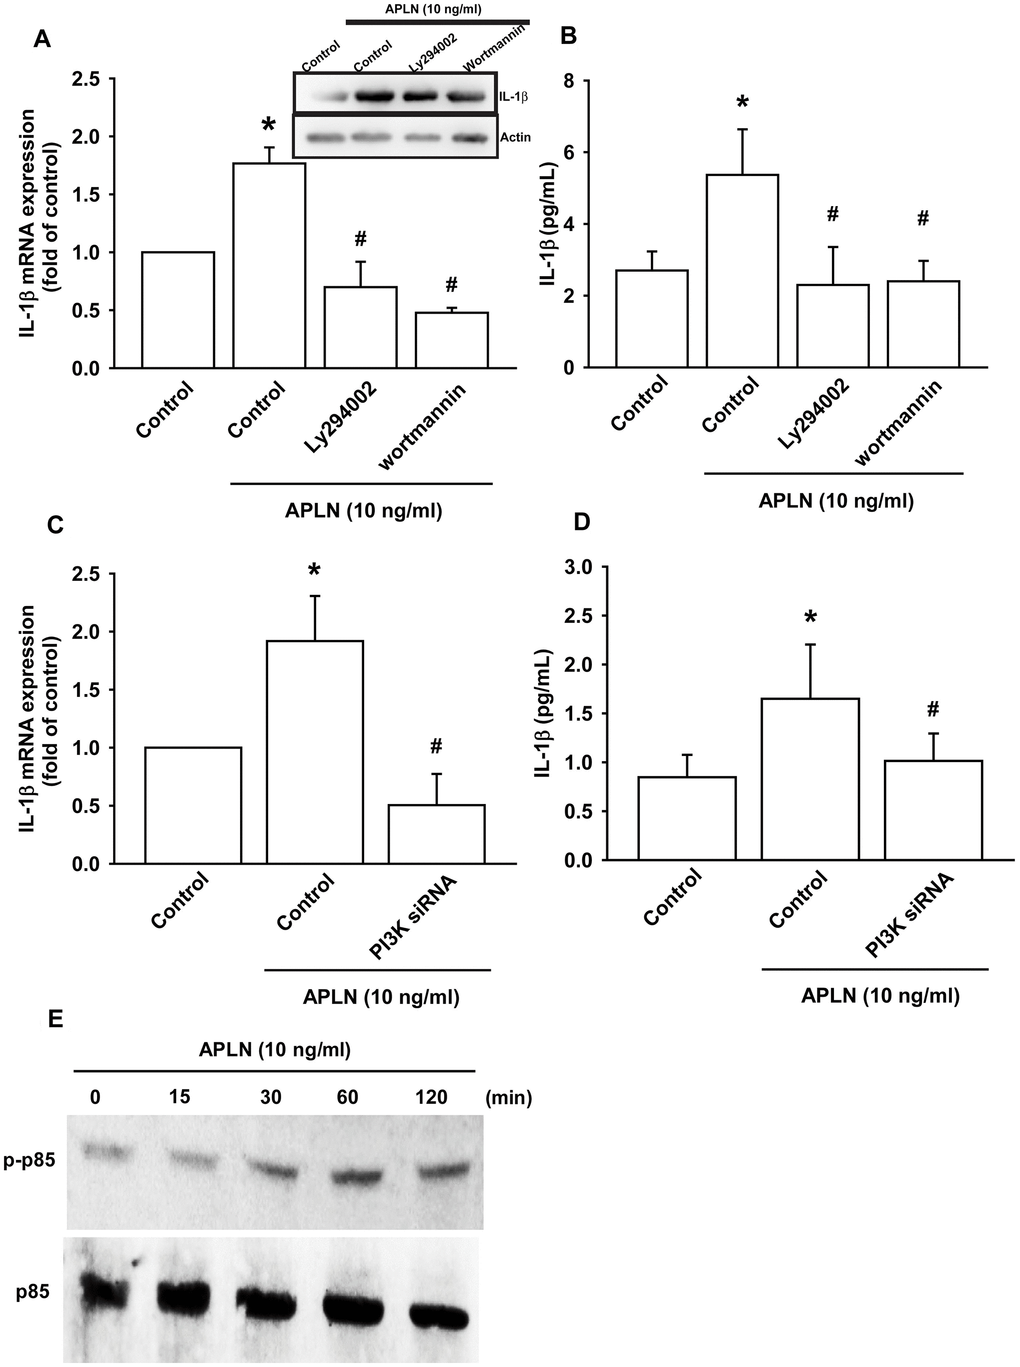 PI3K phosphorylation is involved in APLN-induced IL-1β synthesis. (A) OASFs were pretreated with PI3K inhibitors (LY294002, Wortmannin; 10 μM) for 30 min, then incubated with APLN (10 ng/mL) for 24 h. IL-1β mRNA and protein levels were examined by RT-qPCR (n=4) and Western blot (n=3) assays, respectively. (B) OASFs were pretreated with PI3K inhibitors (LY294002, Wortmannin; 10 μM) for 30 min, then incubated with APLN (10 ng/mL) for 24 h. Excreted IL-1 β protein levels were examined by ELISA (n=5). (C) OASFs were transfected with PI3K siRNA (1 μg) then incubated with APLN (10 ng/mL) for 24 h. IL-1β mRNA levels were examined by ELISA assay (n=5). (D) OASFs were transfected with PI3K siRNA (1 μg), then incubated with APLN (10 ng/mL) for 24 h. Excreted IL-1β protein levels were examined by ELISA assay (n=5). (E) OASFs were incubated with APLN for the indicated time intervals, and the extent of PI3K phosphorylation was examined by Western blot (n=3). * pp